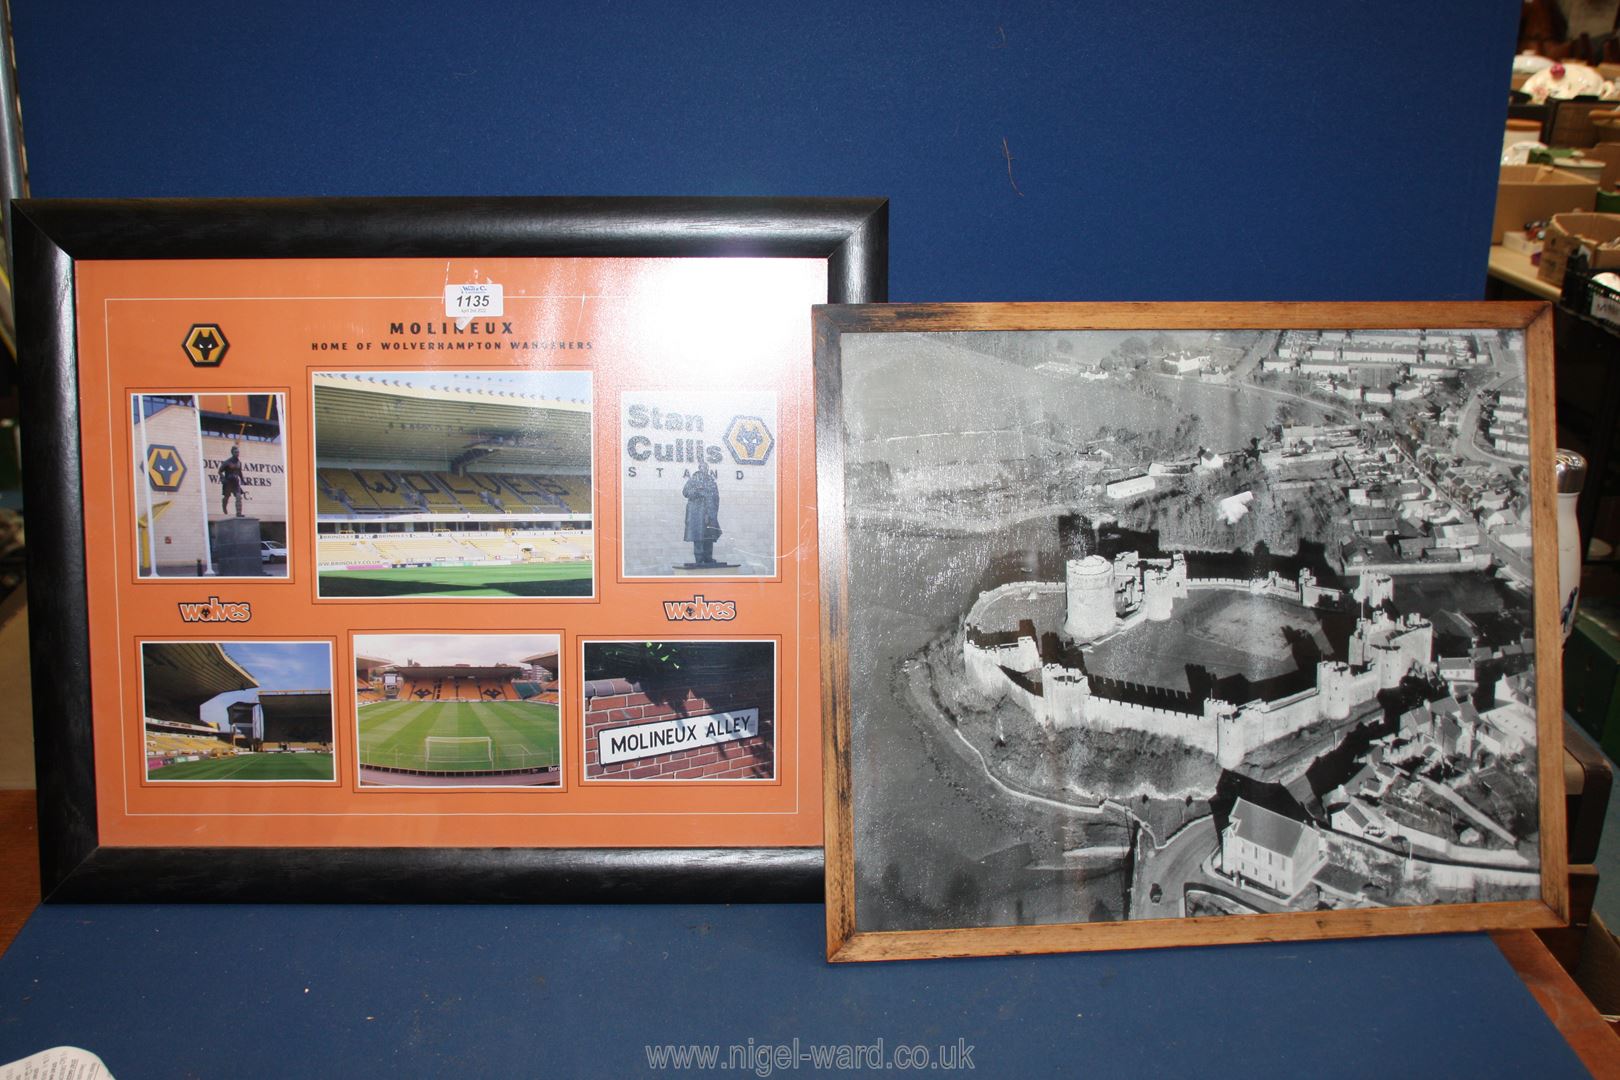 A framed black and white Photograph of a castle and a Poster of the Home of Wolverhampton Wanderers